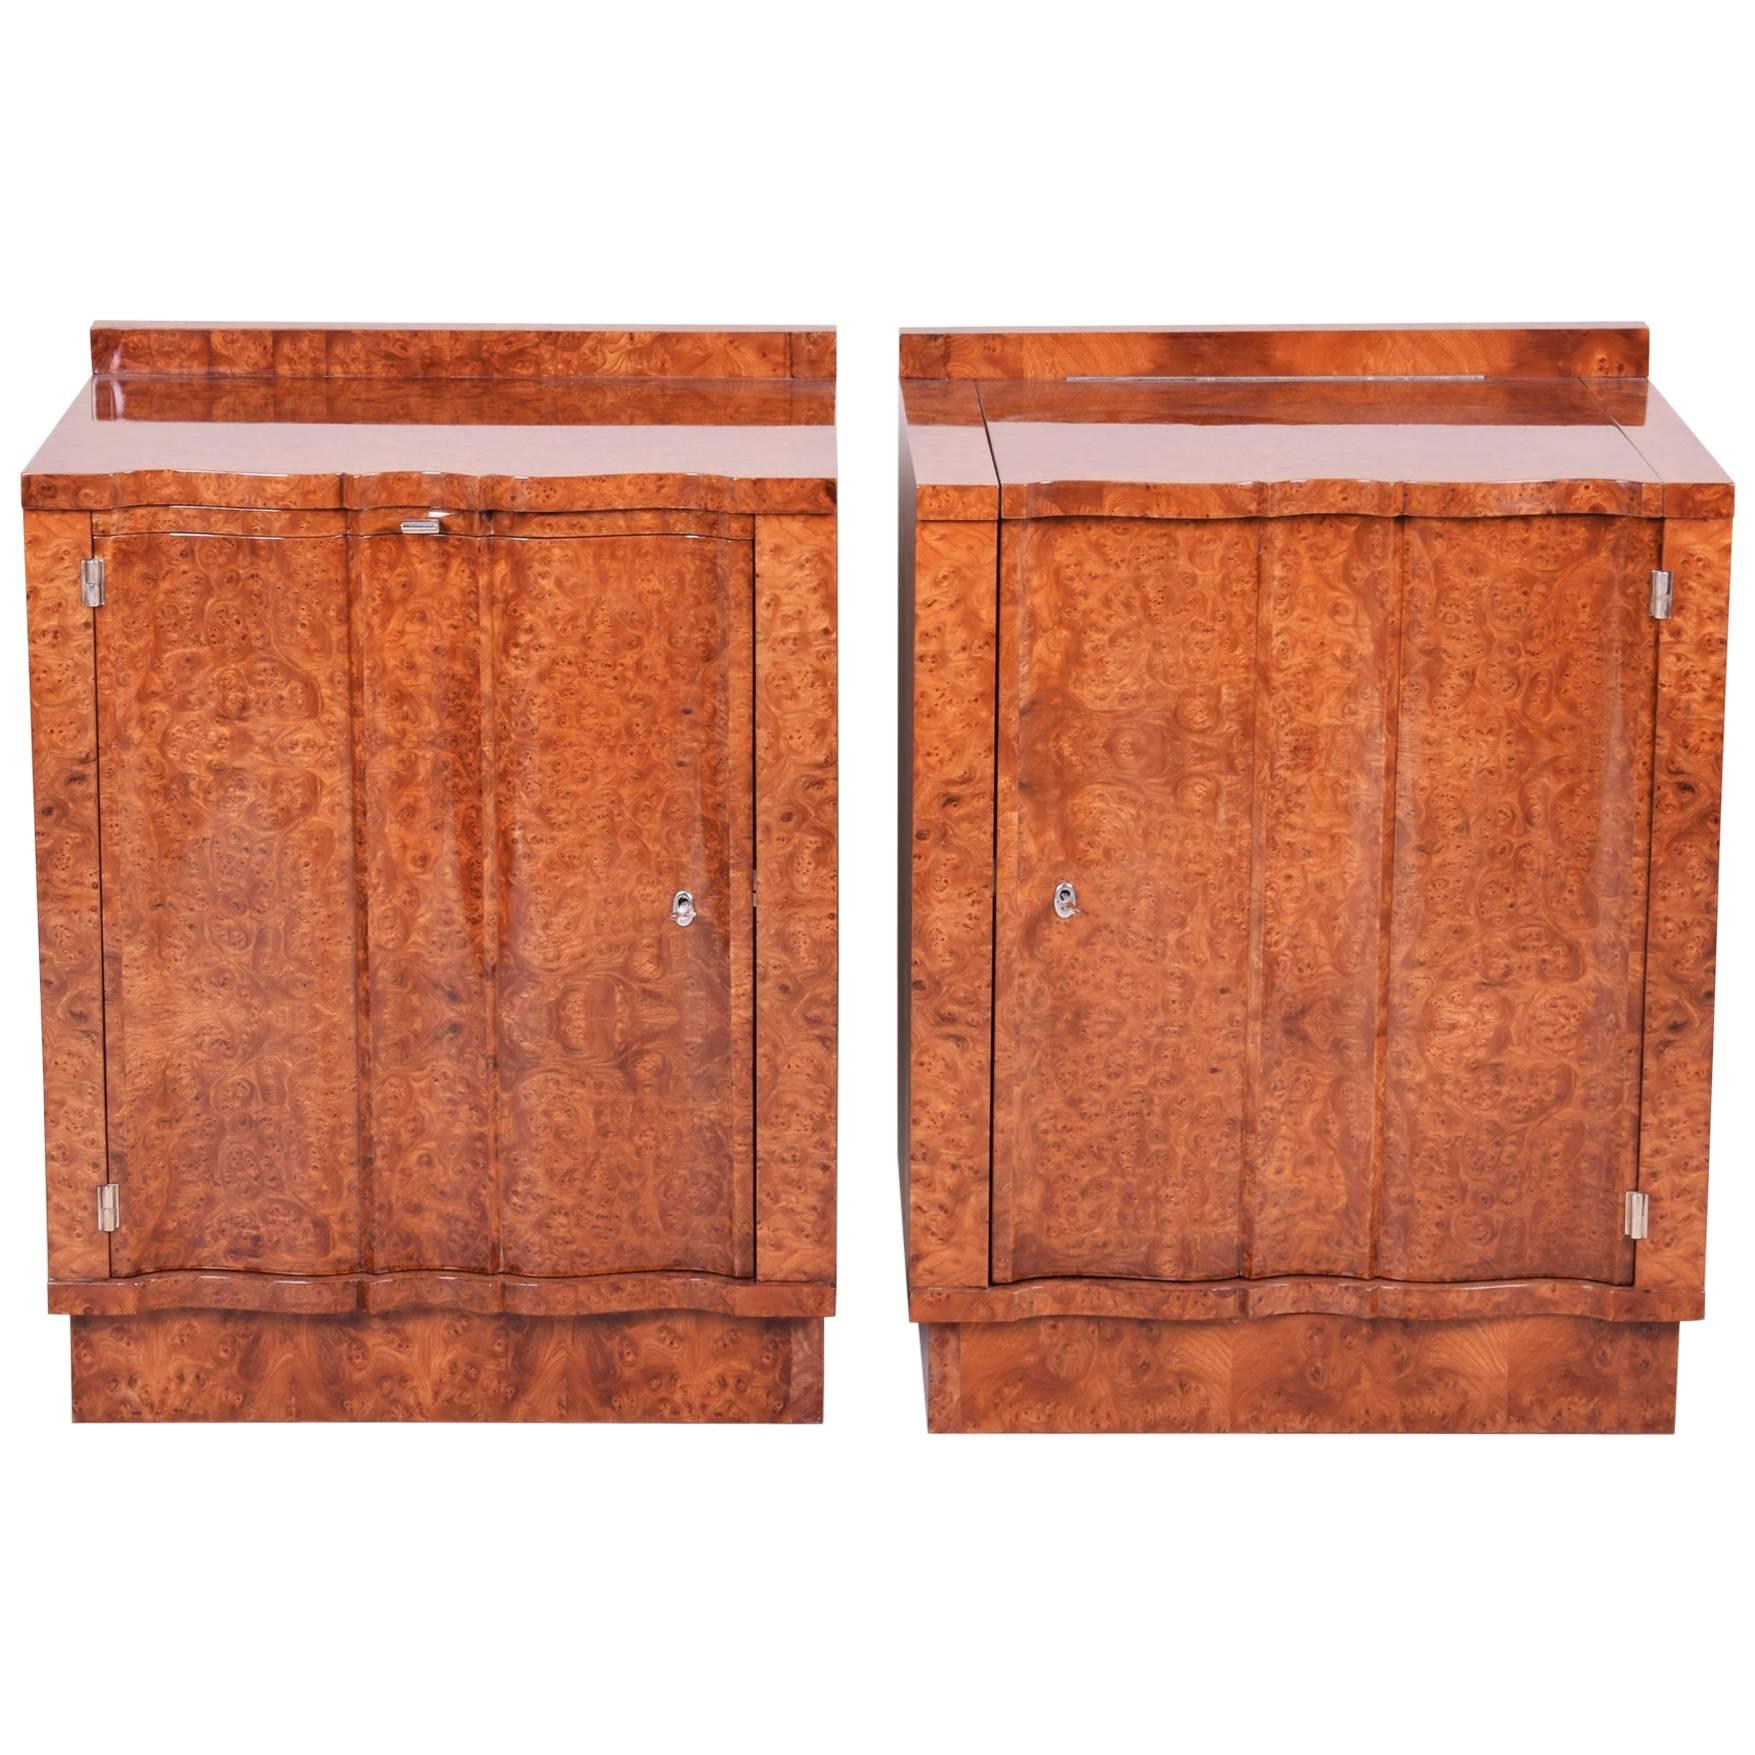 Pair of Art Deco Cabinets with Shelves from Czech Republic